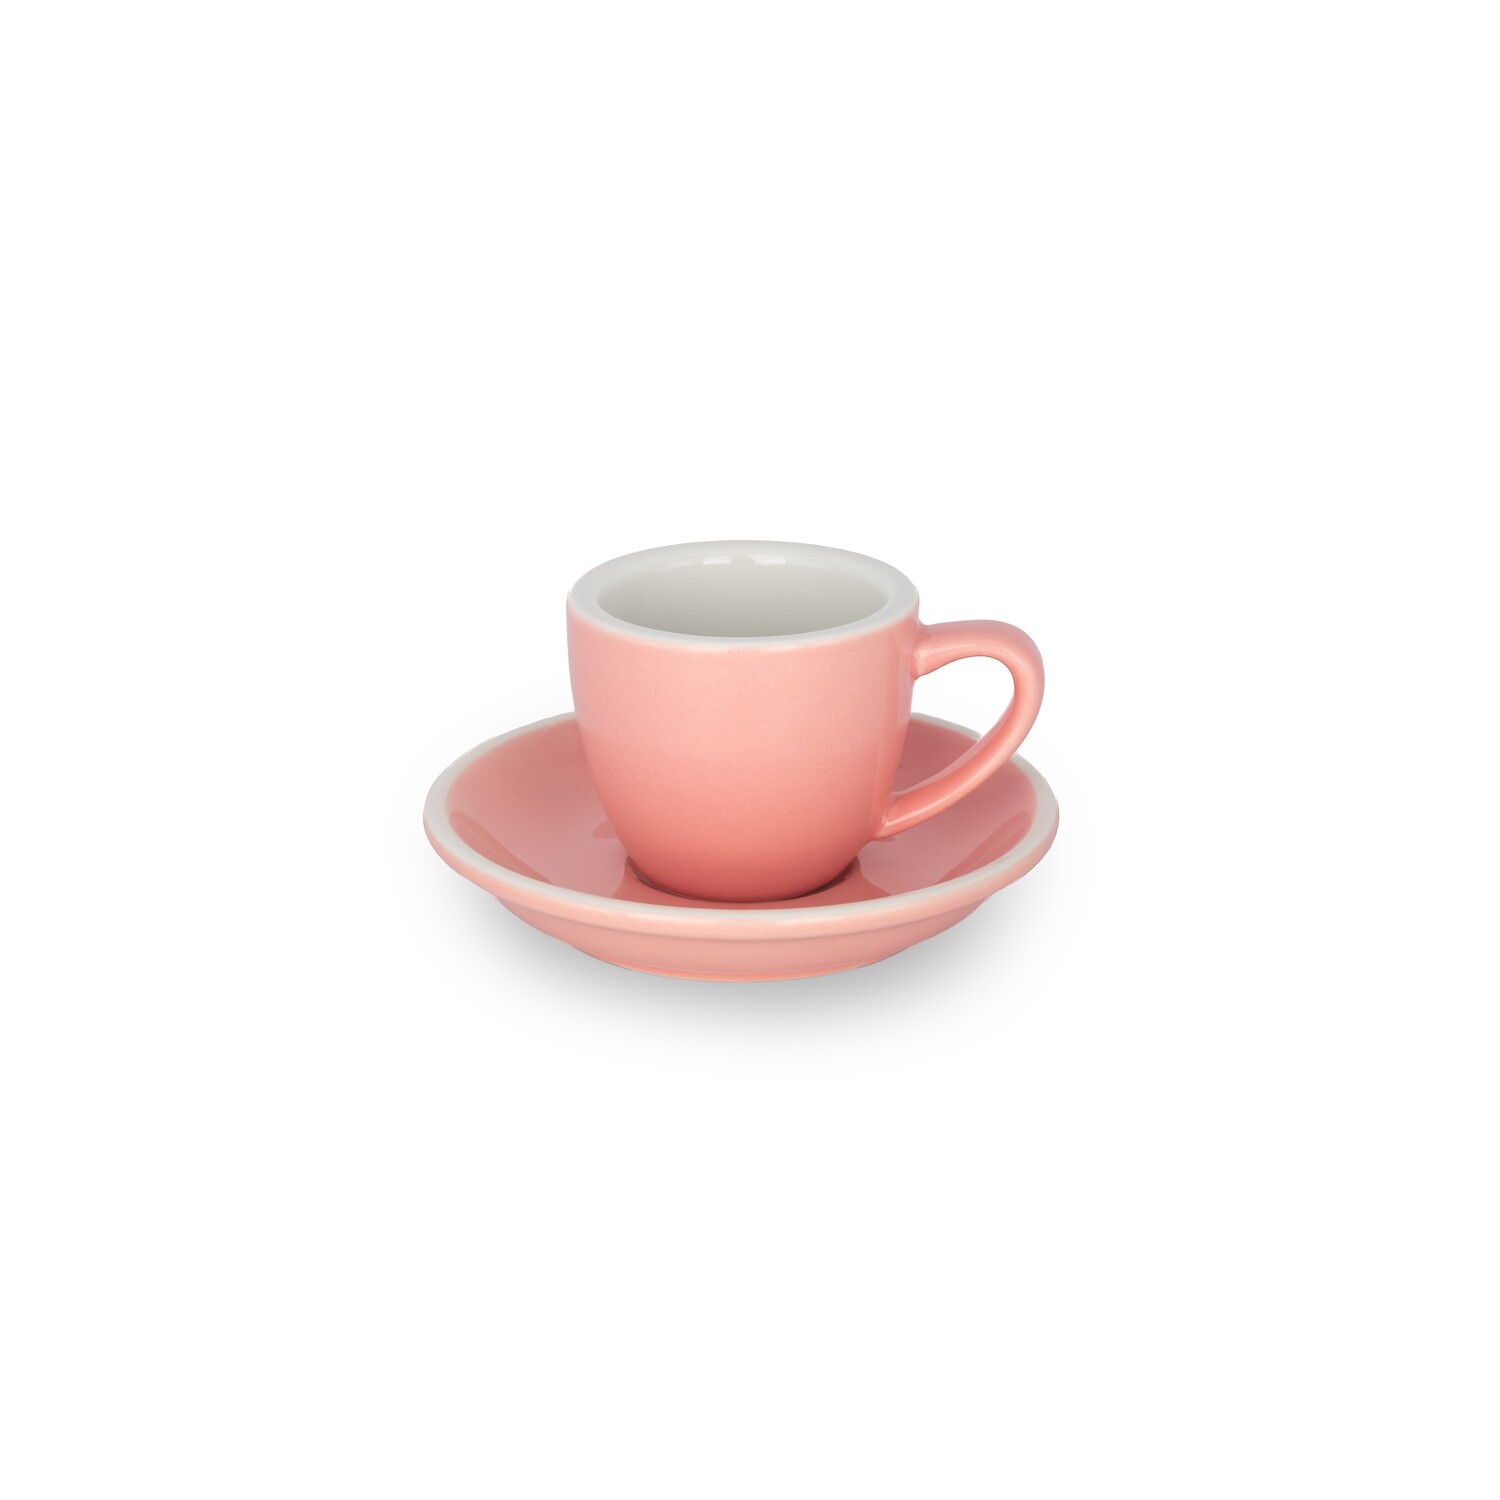 Epic Cups - Expresso 70ml, Couleurs: Rose